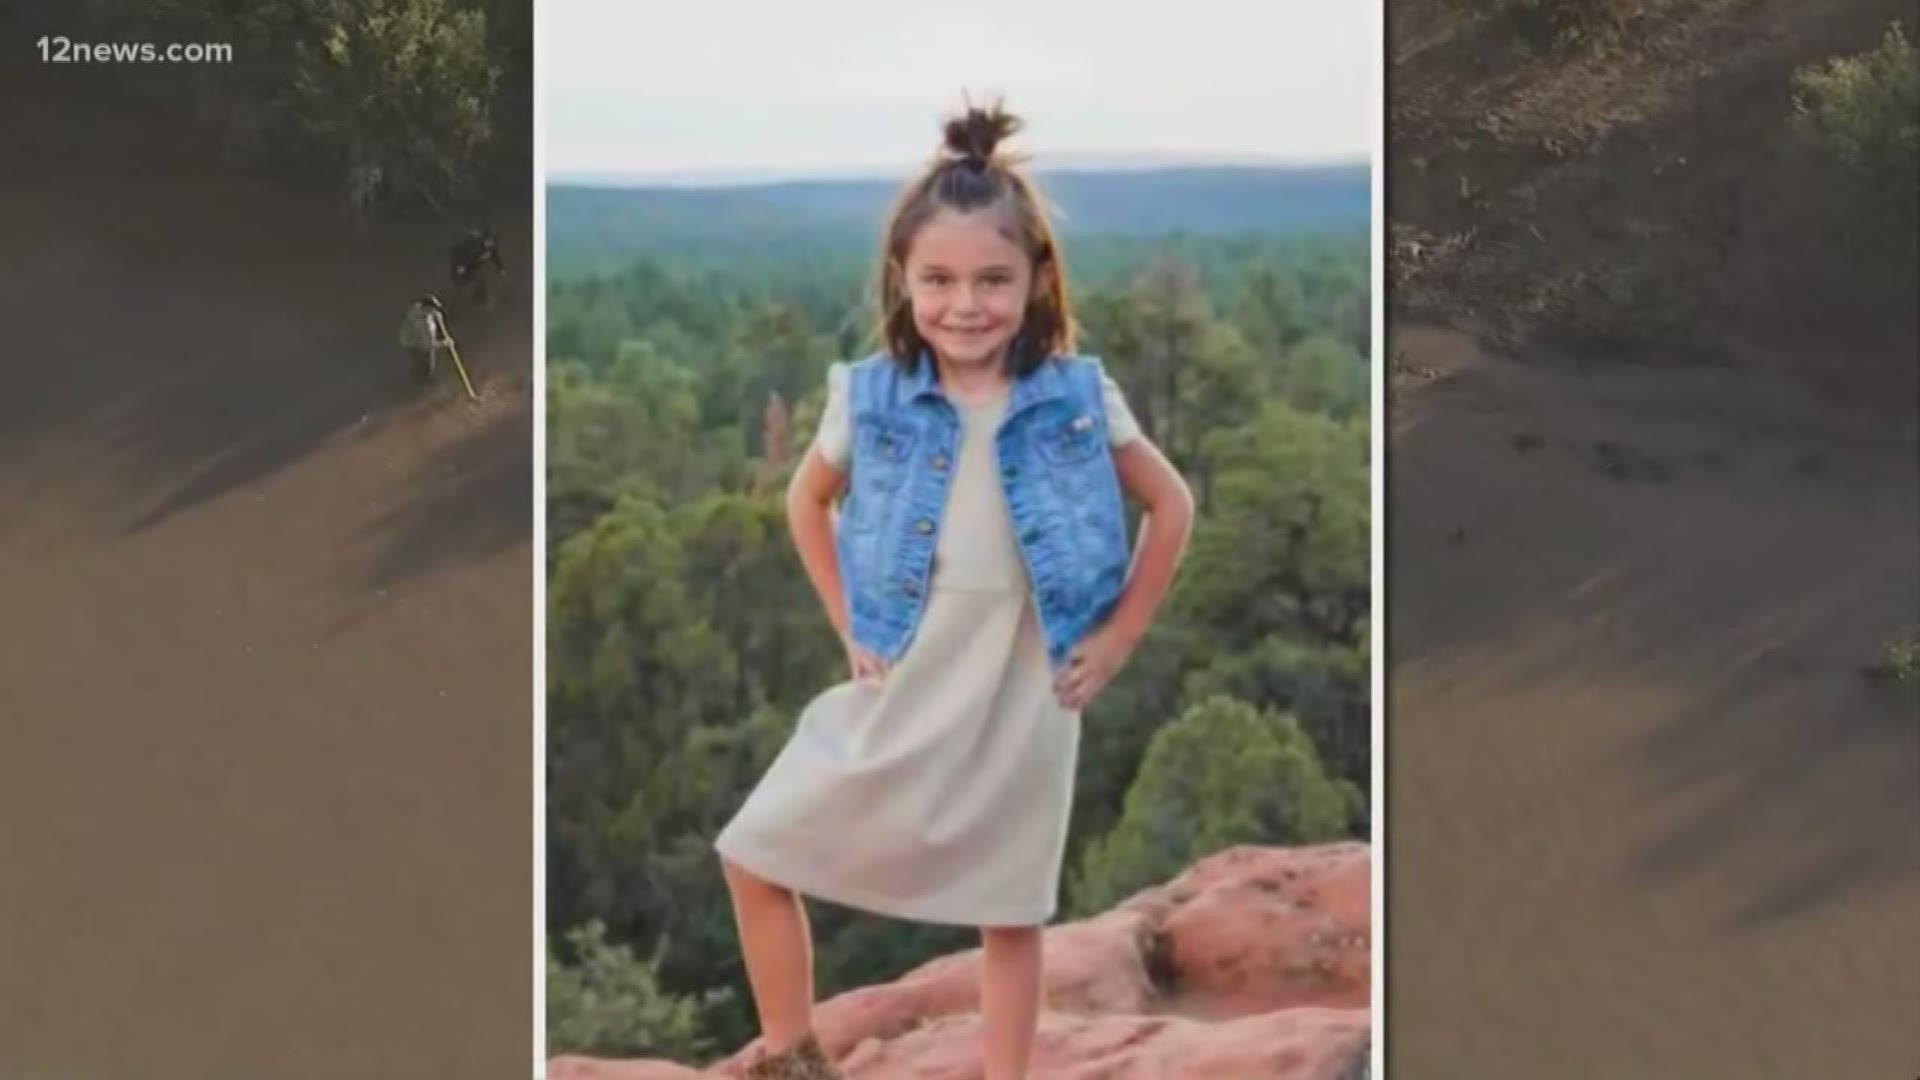 Search crews think it's possible Willa's body could be trapped under debris, possibly in the lake. The search is now a recovery, a way to bring closure to the family